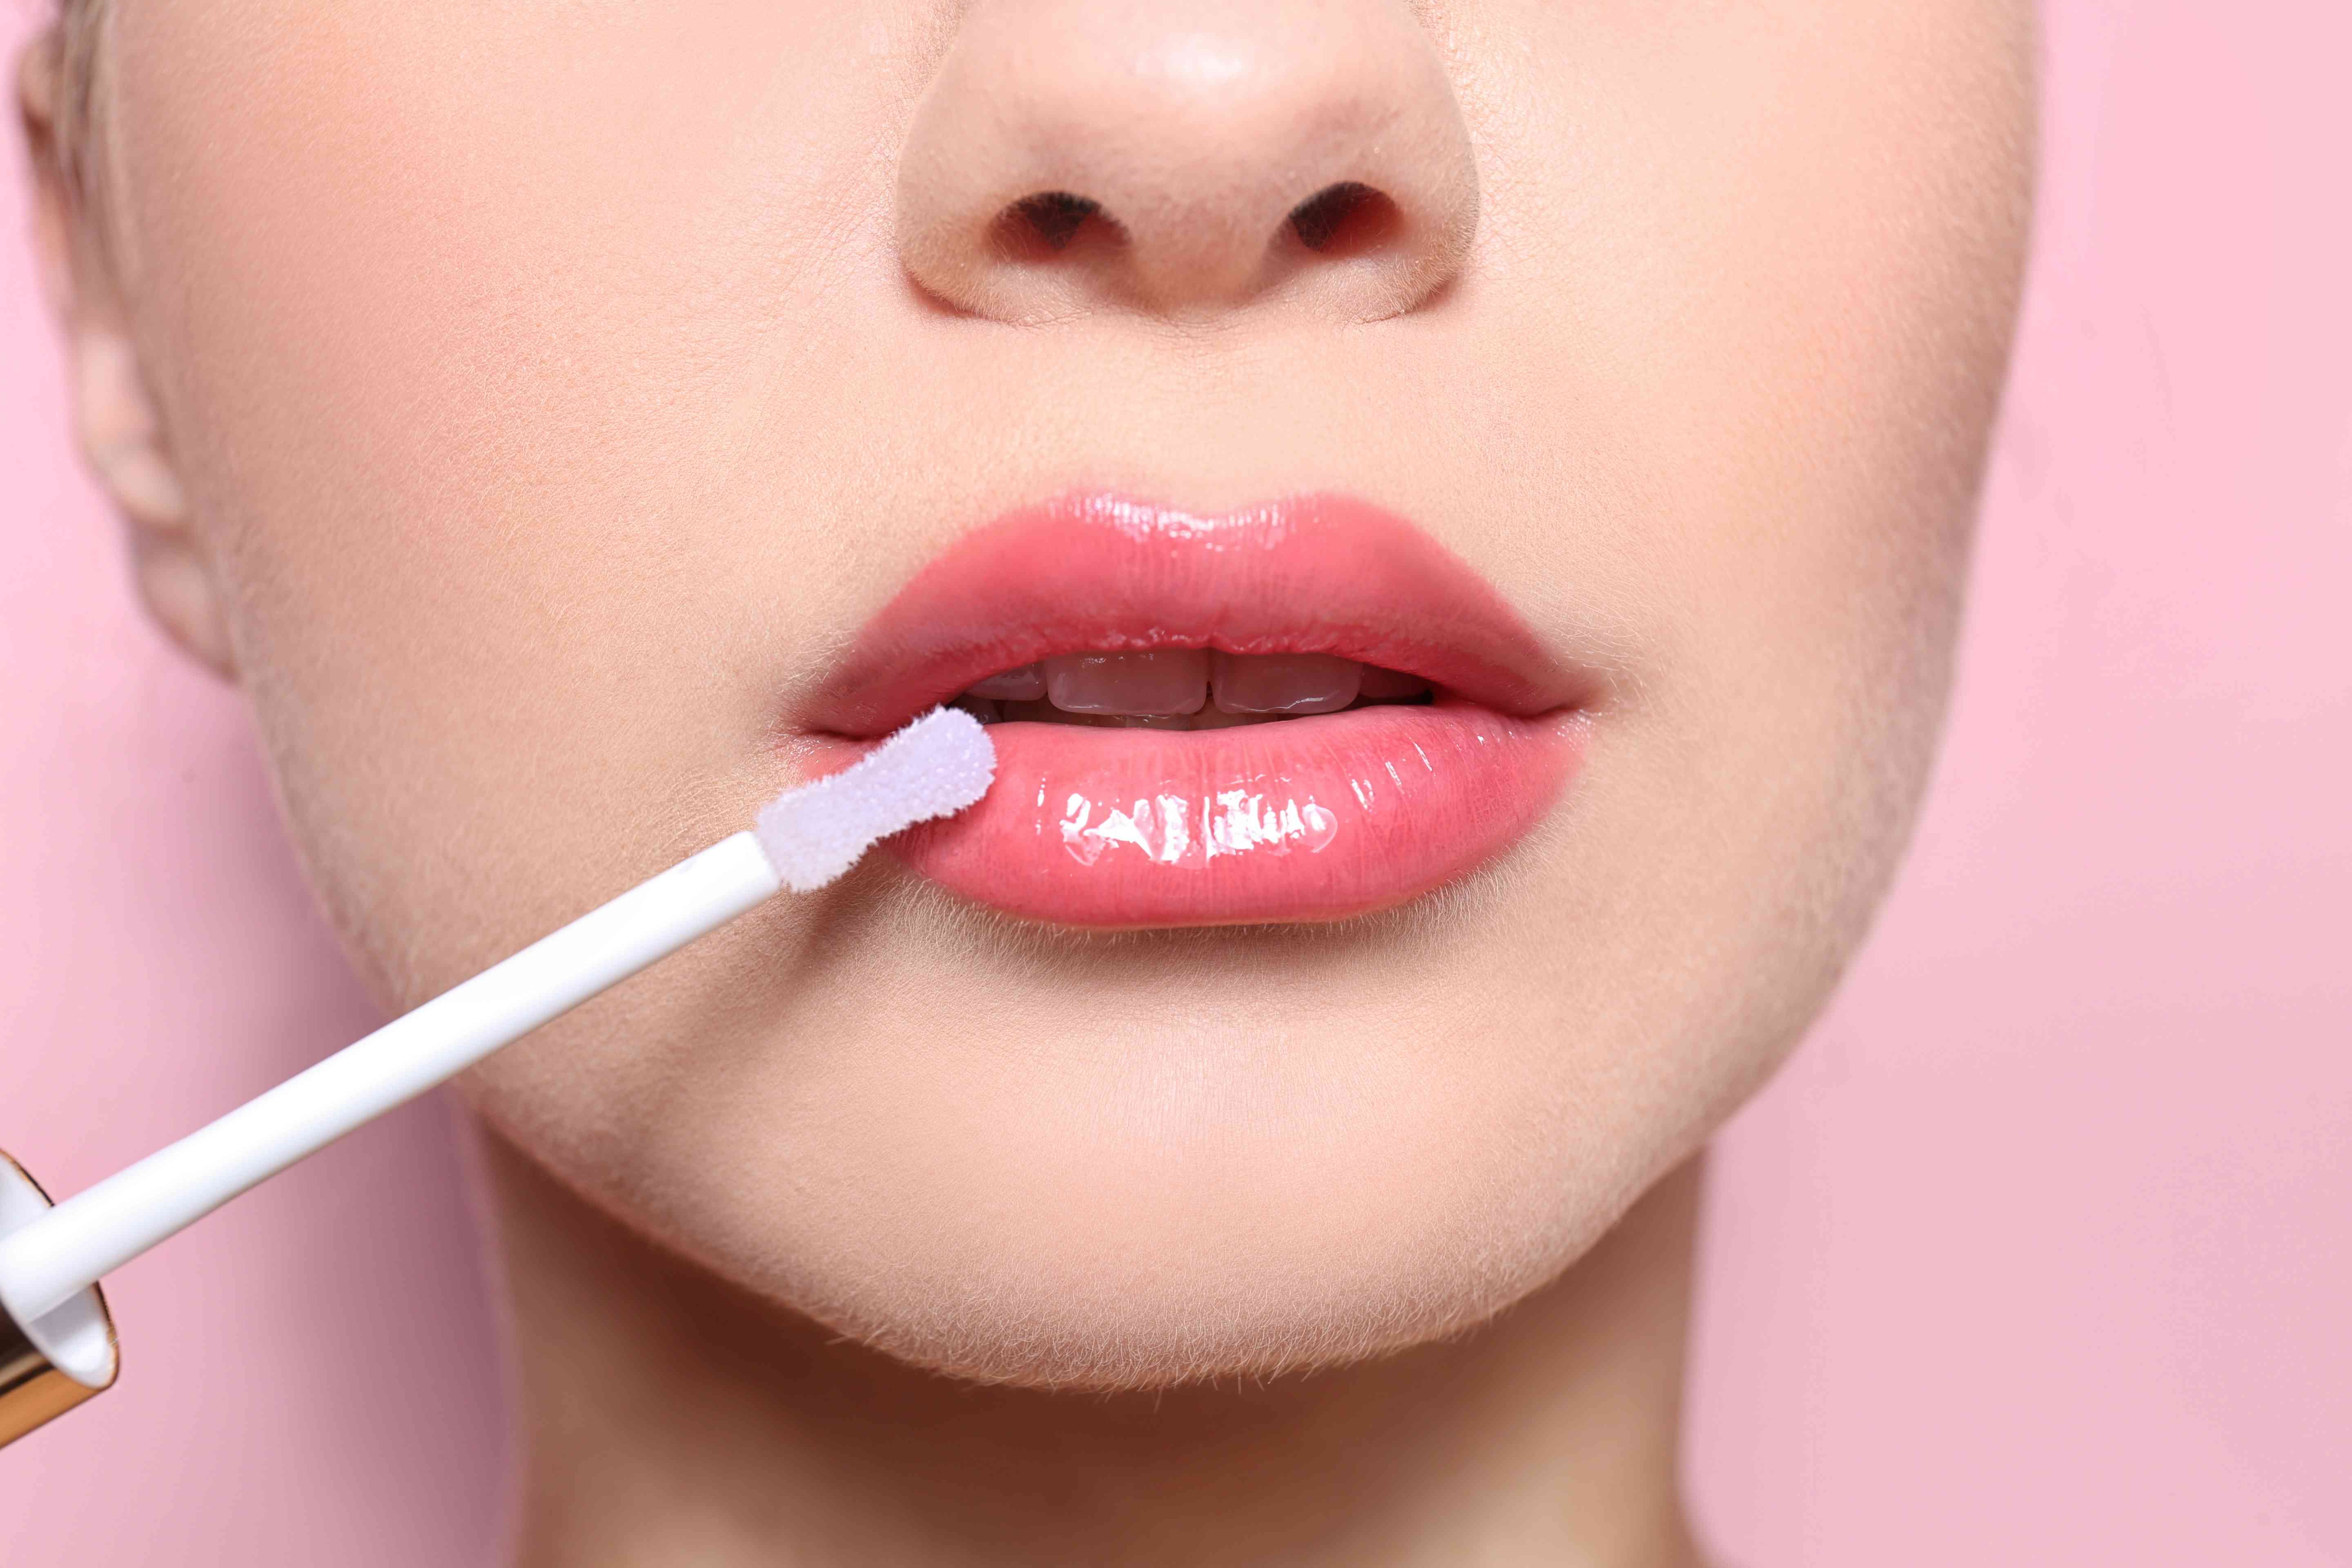 Plump Up Your Pout: The Pros and Cons of Using Lip Plumper Gloss